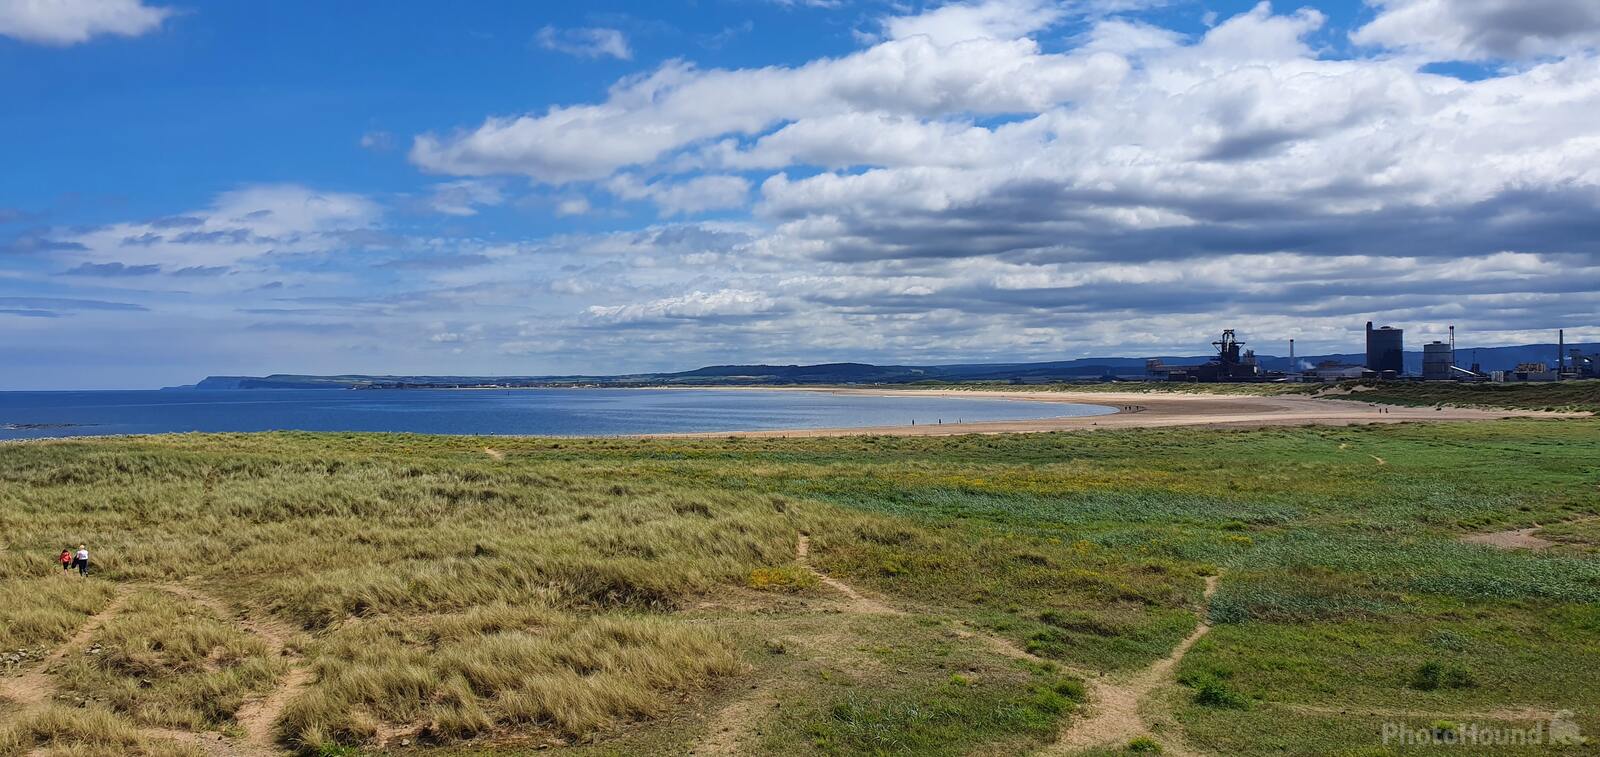 Image of North Gare, Teesmouth by Team PhotoHound